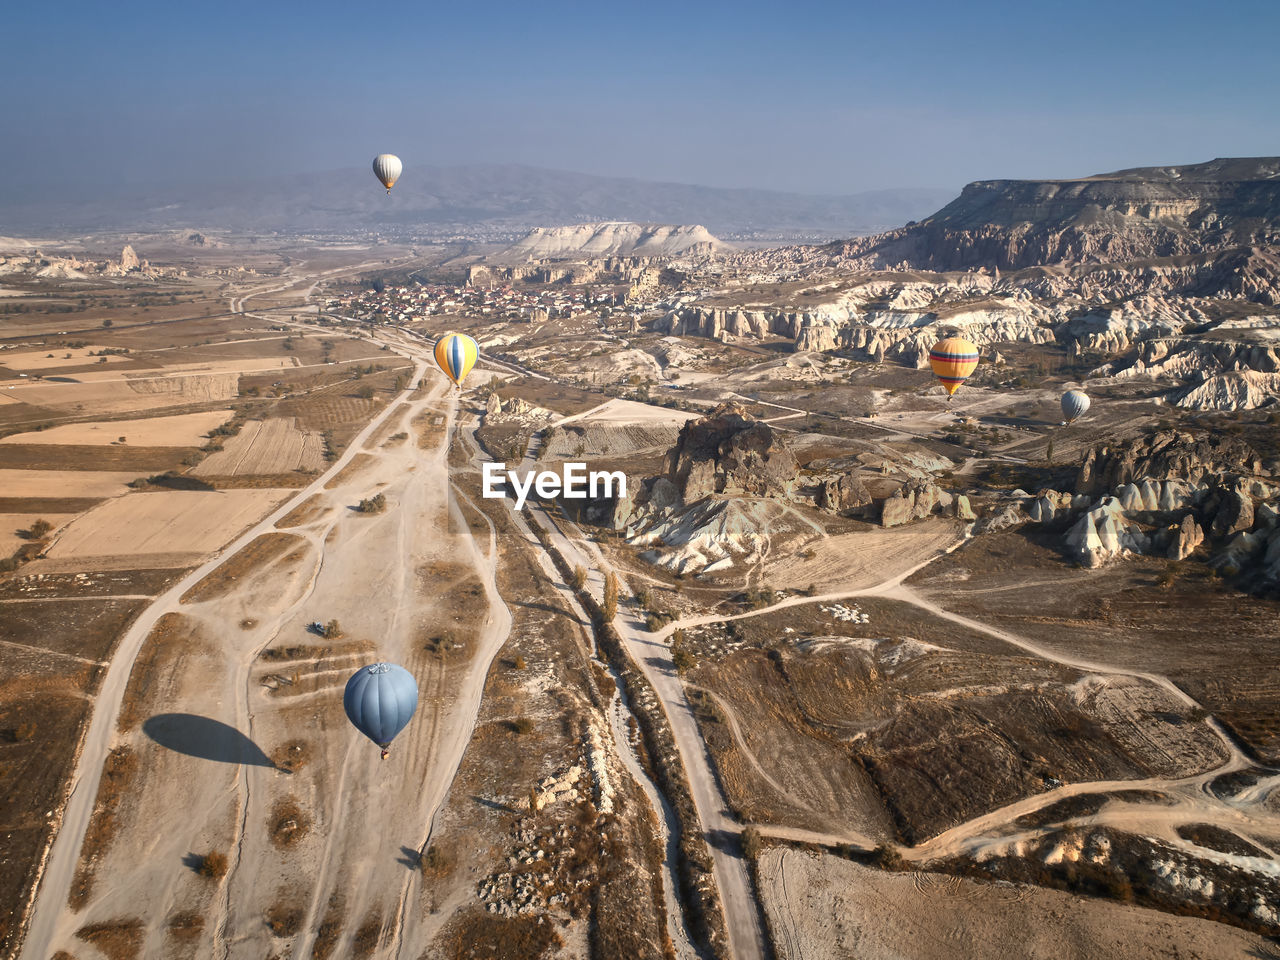 Aerial view of hot air balloon over landscape against sky